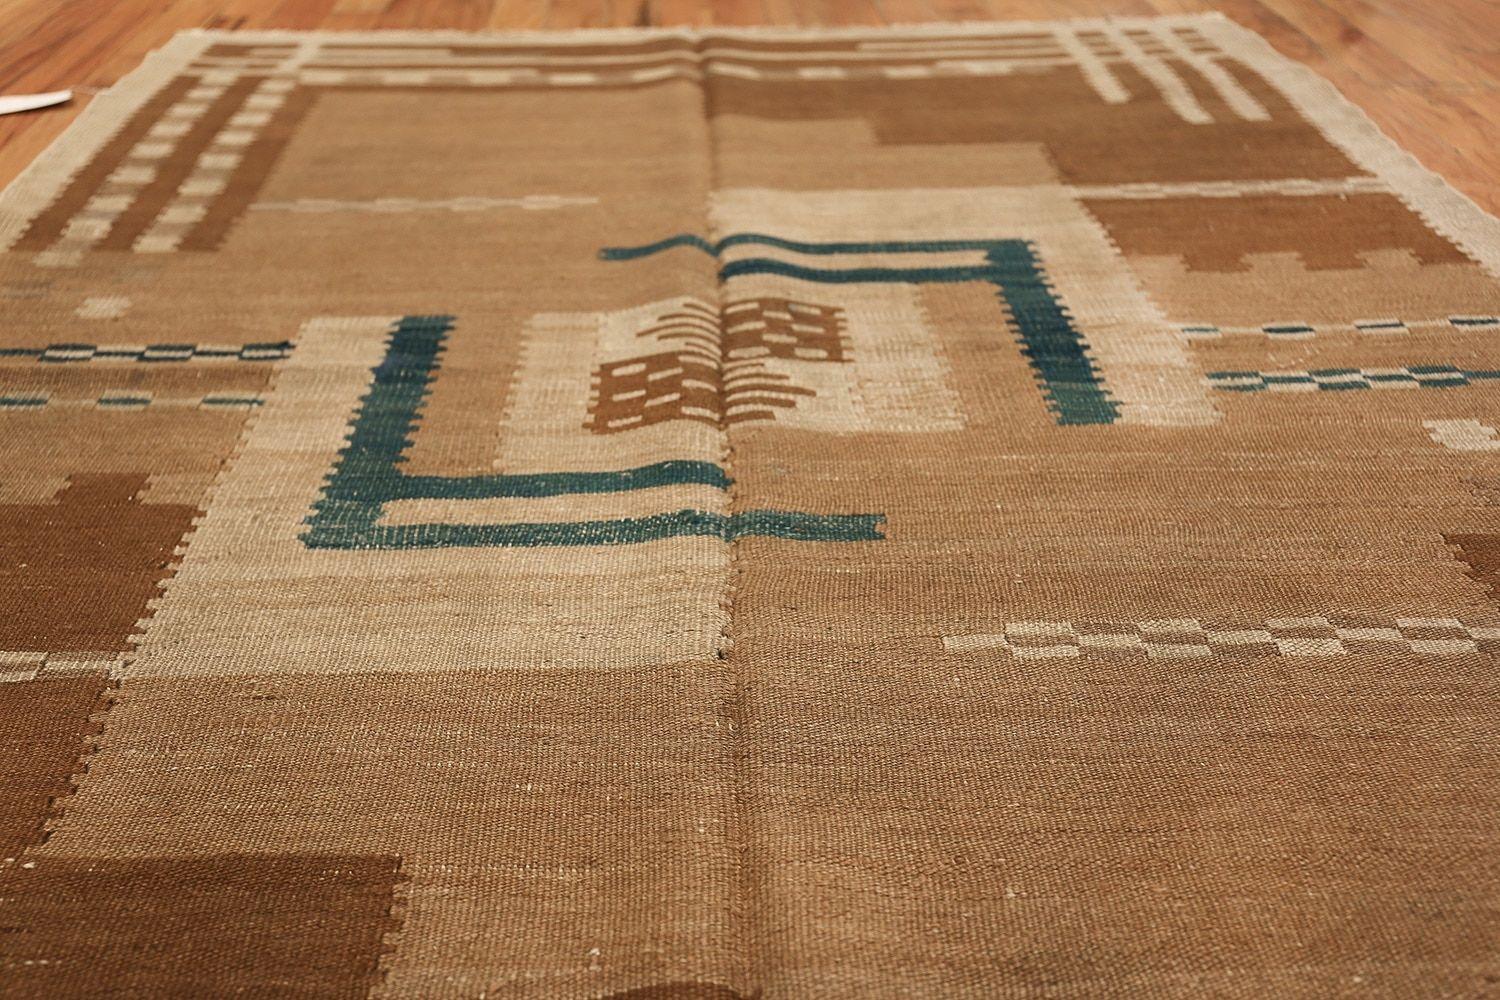 Vintage Scandinavian flat-woven Swedish Kilim rug, country of origin: Sweden, date: circa mid-20th century. Size: 5 ft 4 in x 7 ft 2 in (1.63 m x 2.18 m). 